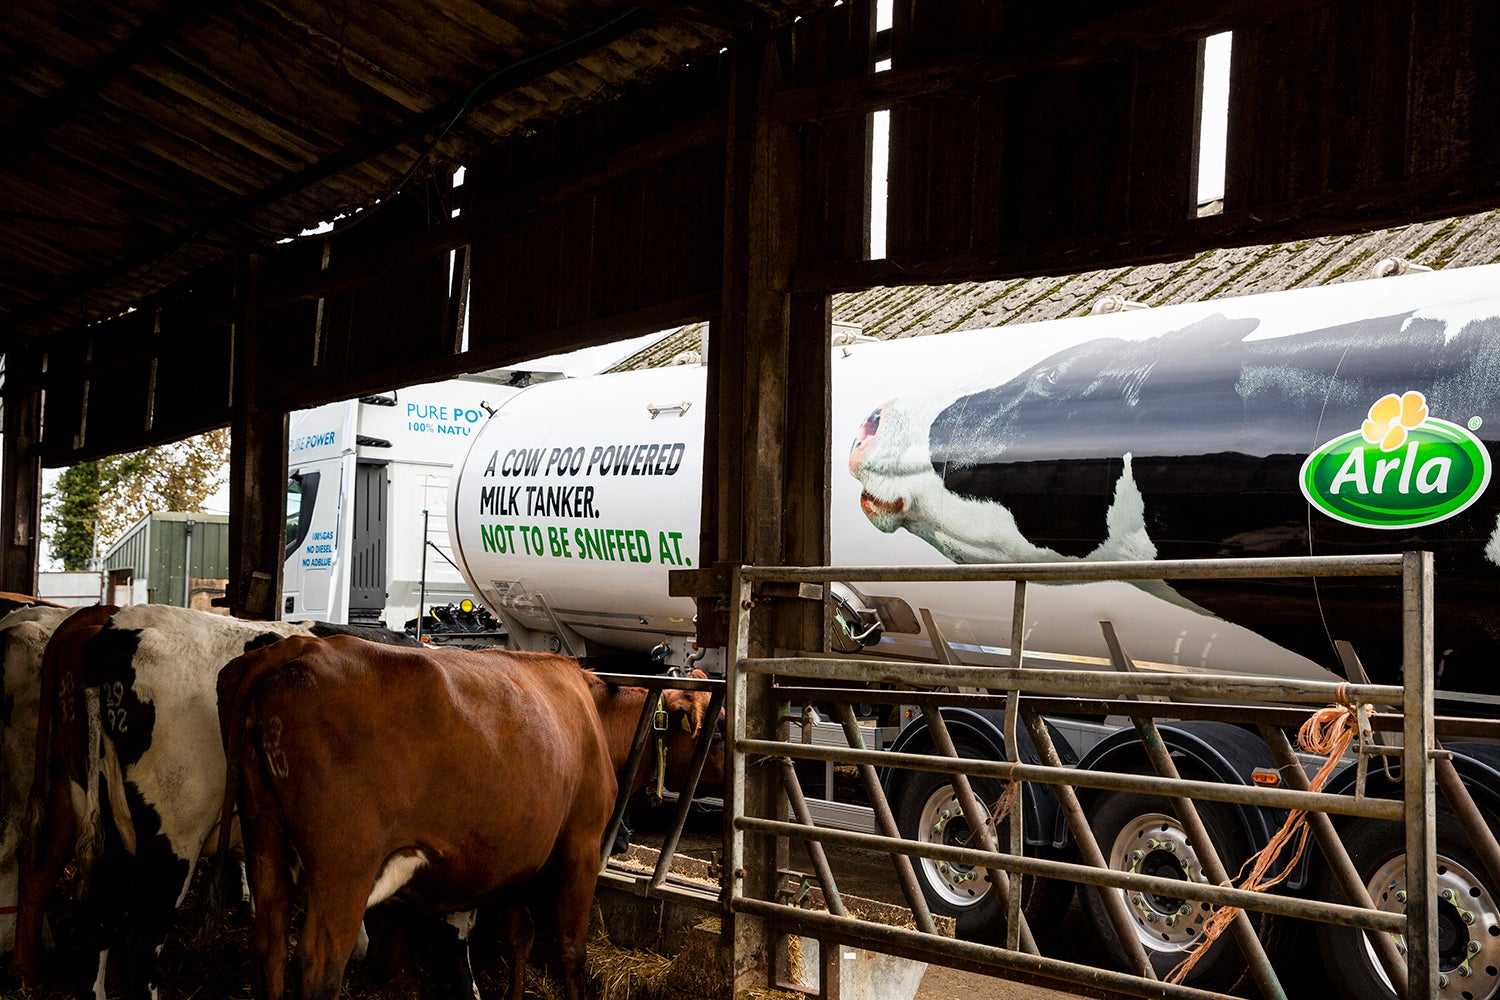 A milk truck parked next to dairy cows in a barn